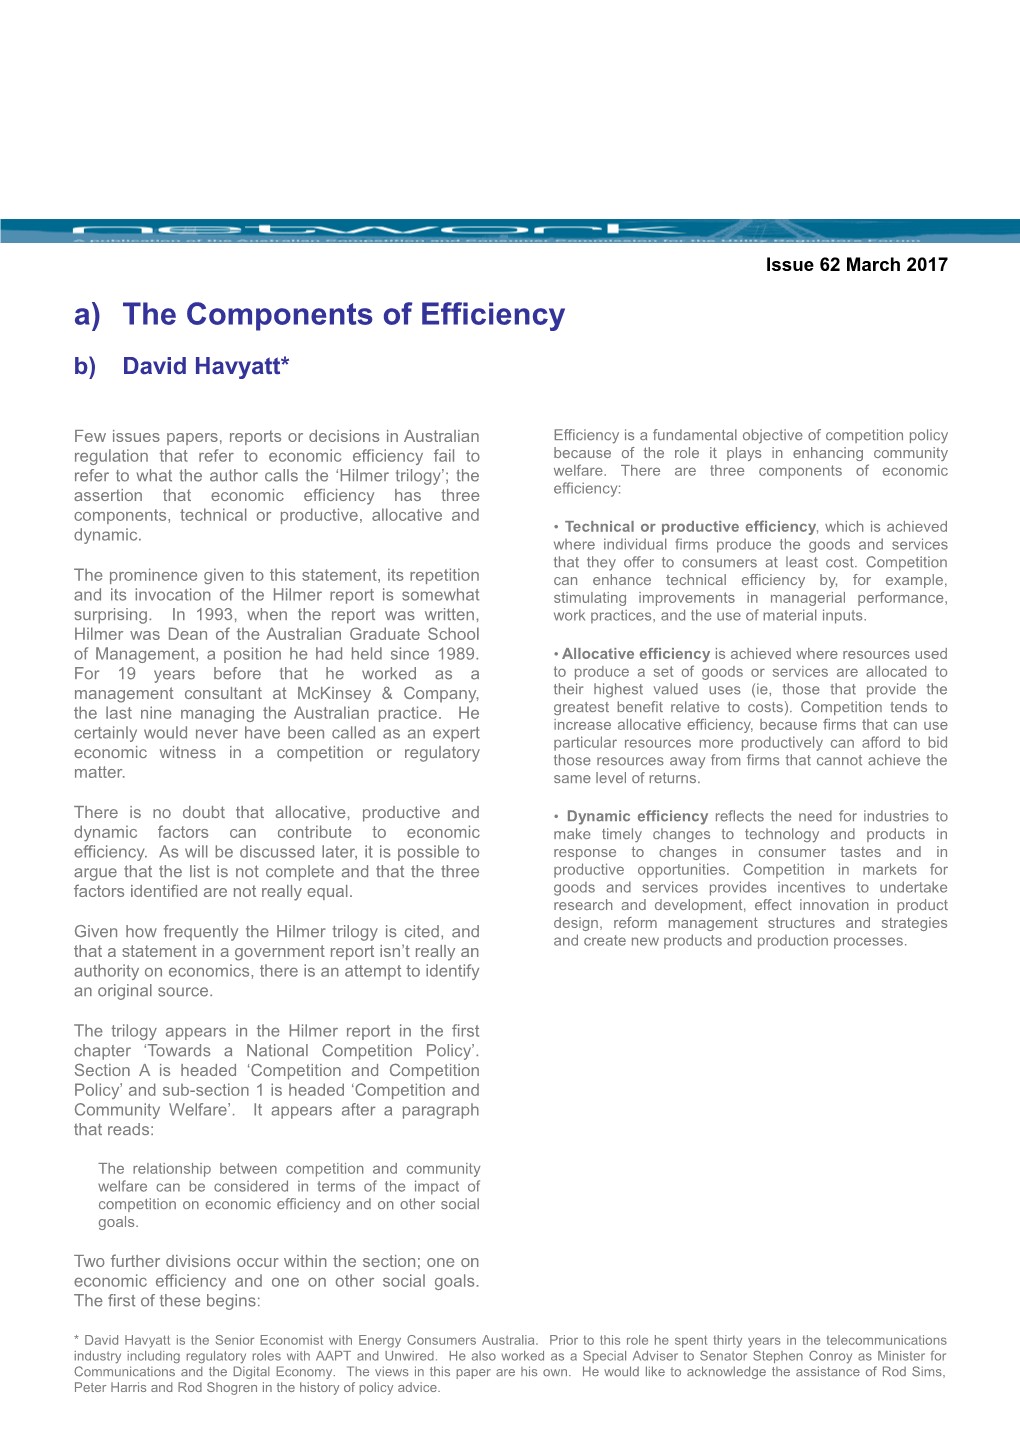 The Components of Efficiency